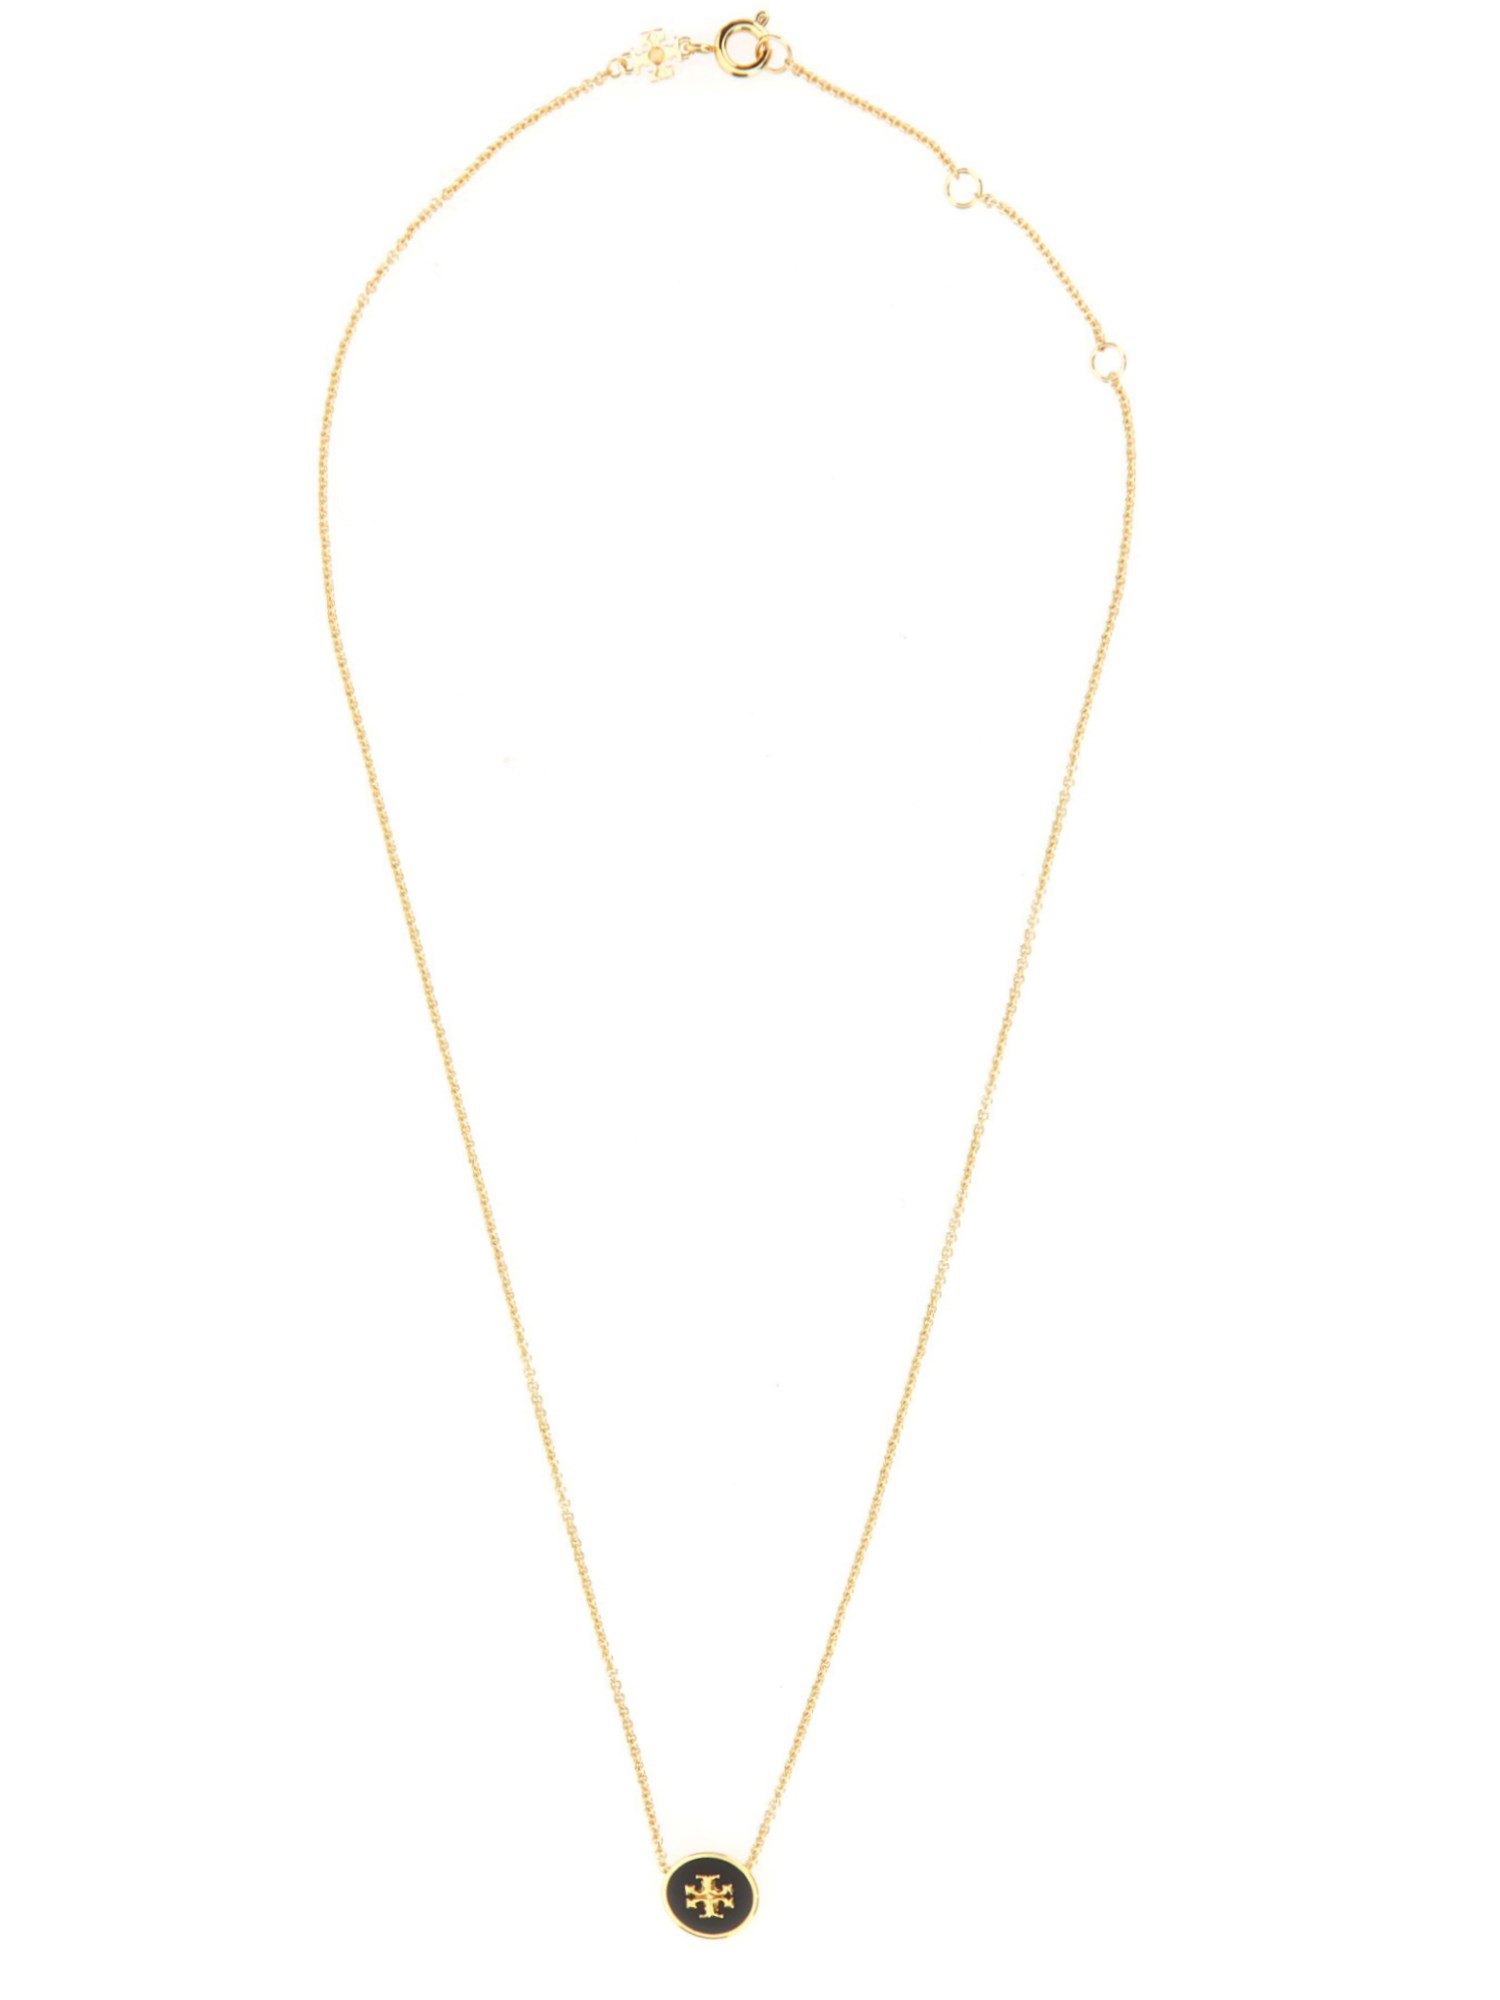 Tory Burch "kira" Necklace. In Gold